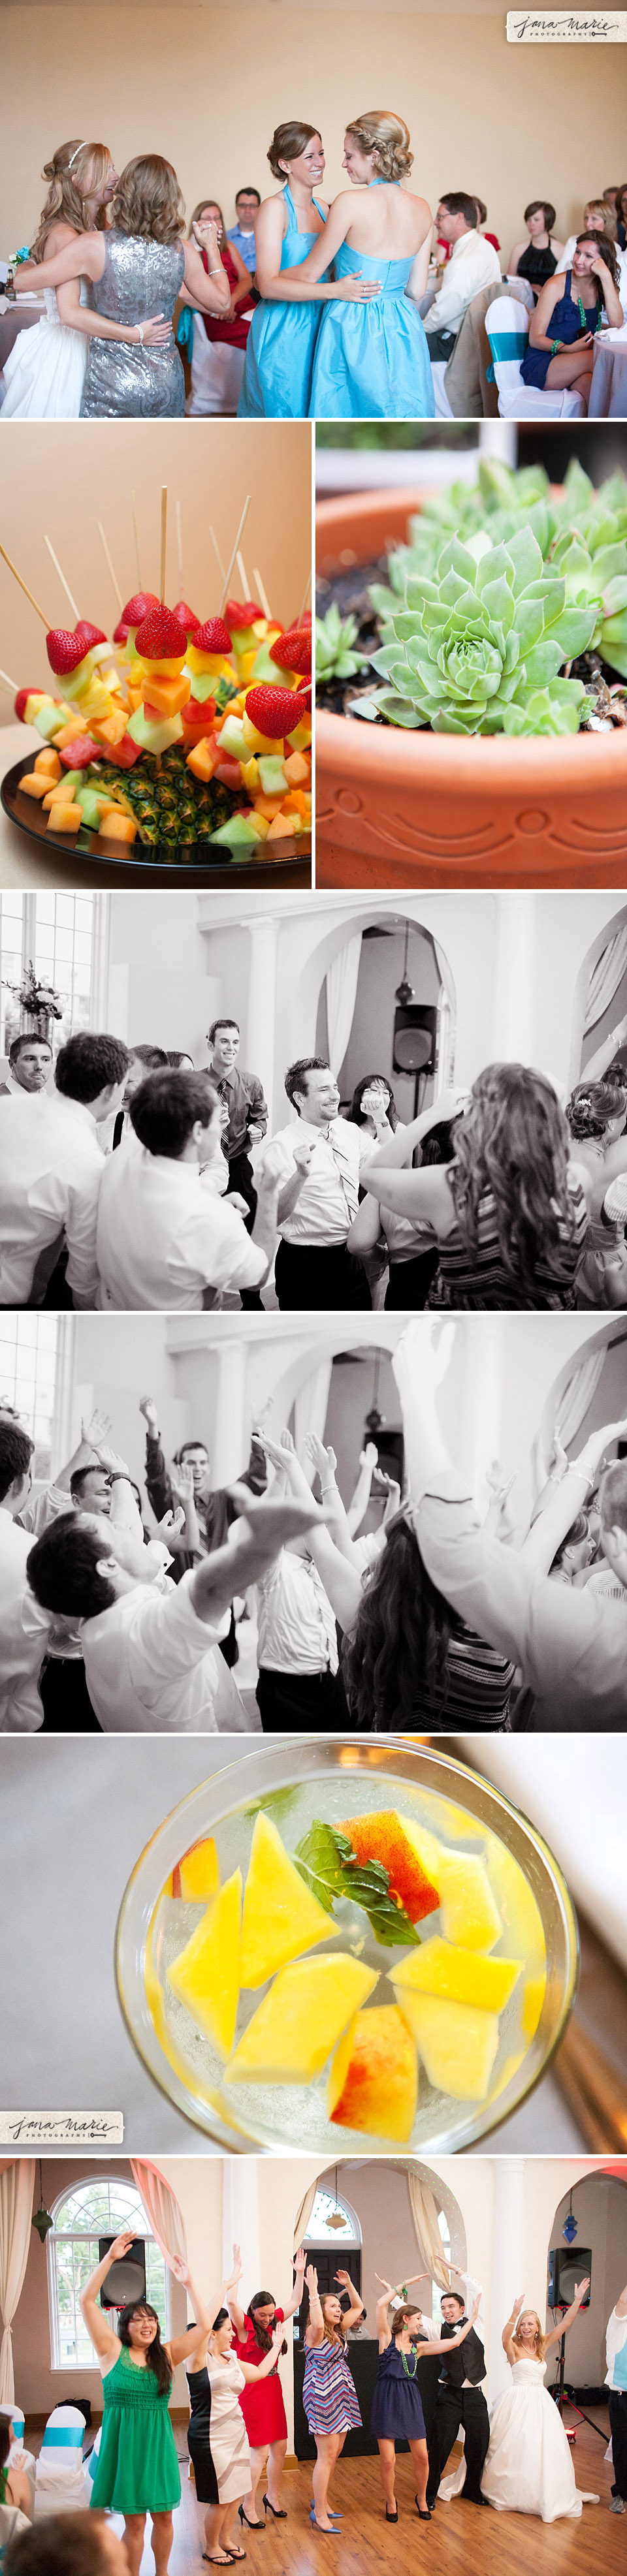 Black and white photography, Midwest weddings, featured images, dancing, YMCA